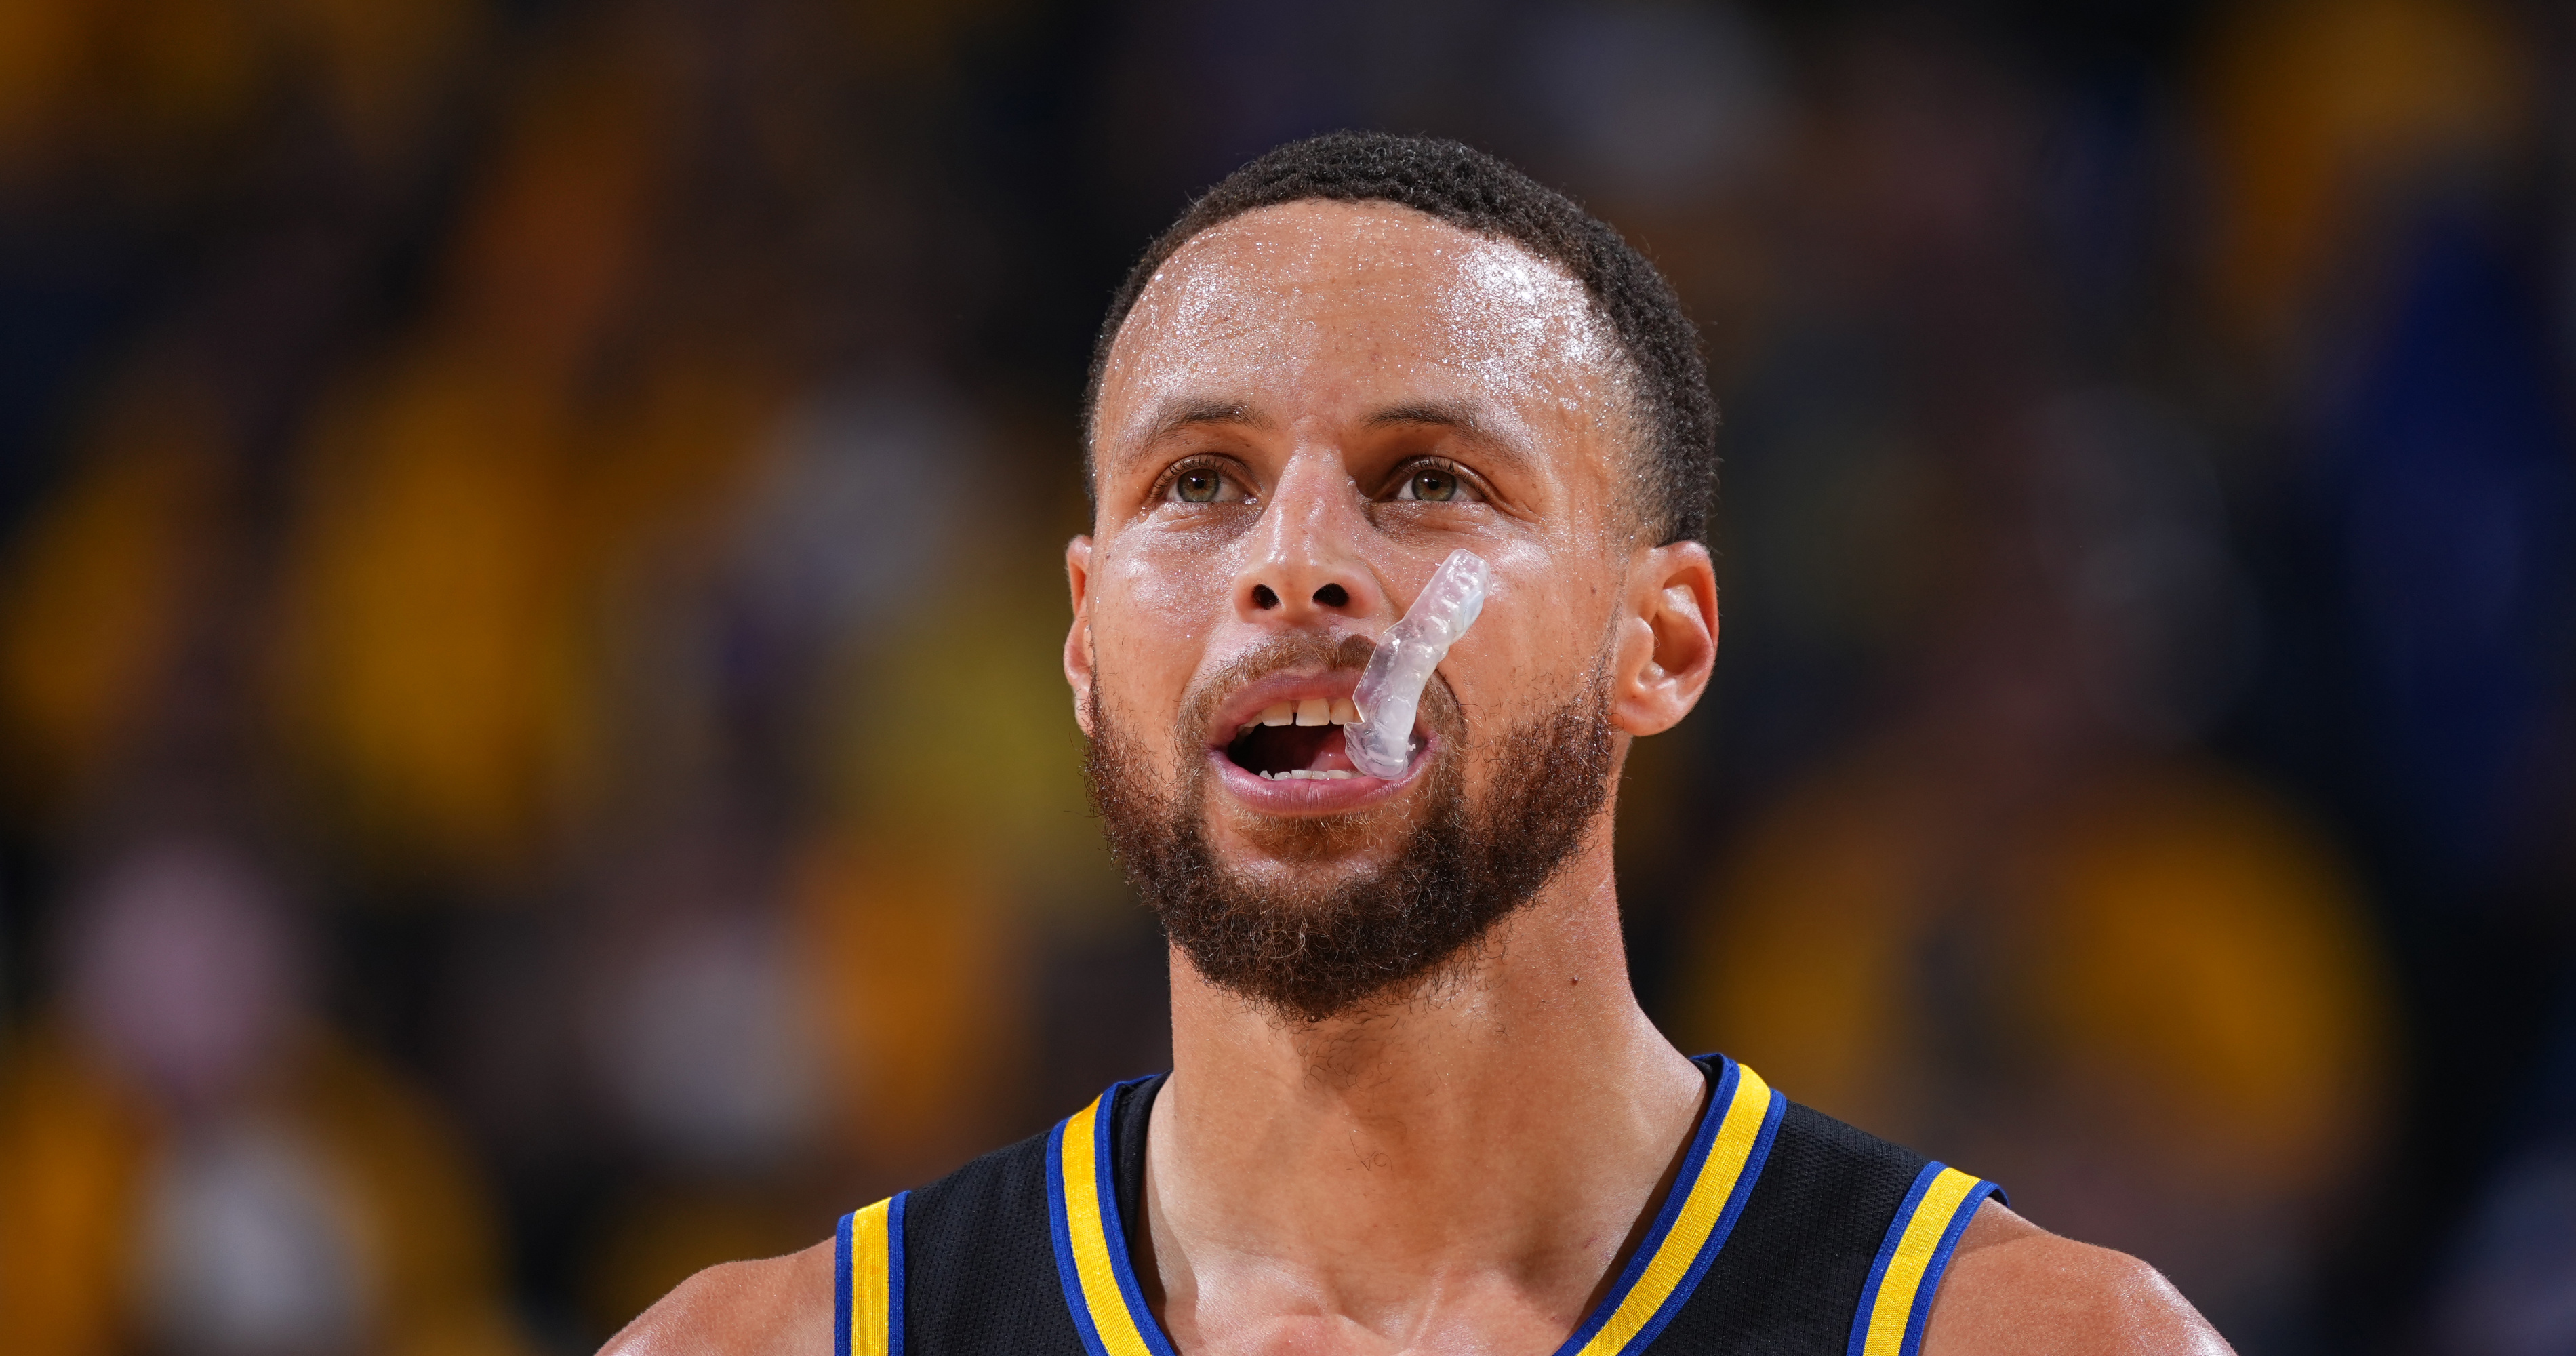 NBA playoffs: Stephen Curry leads Warriors to Western Conference